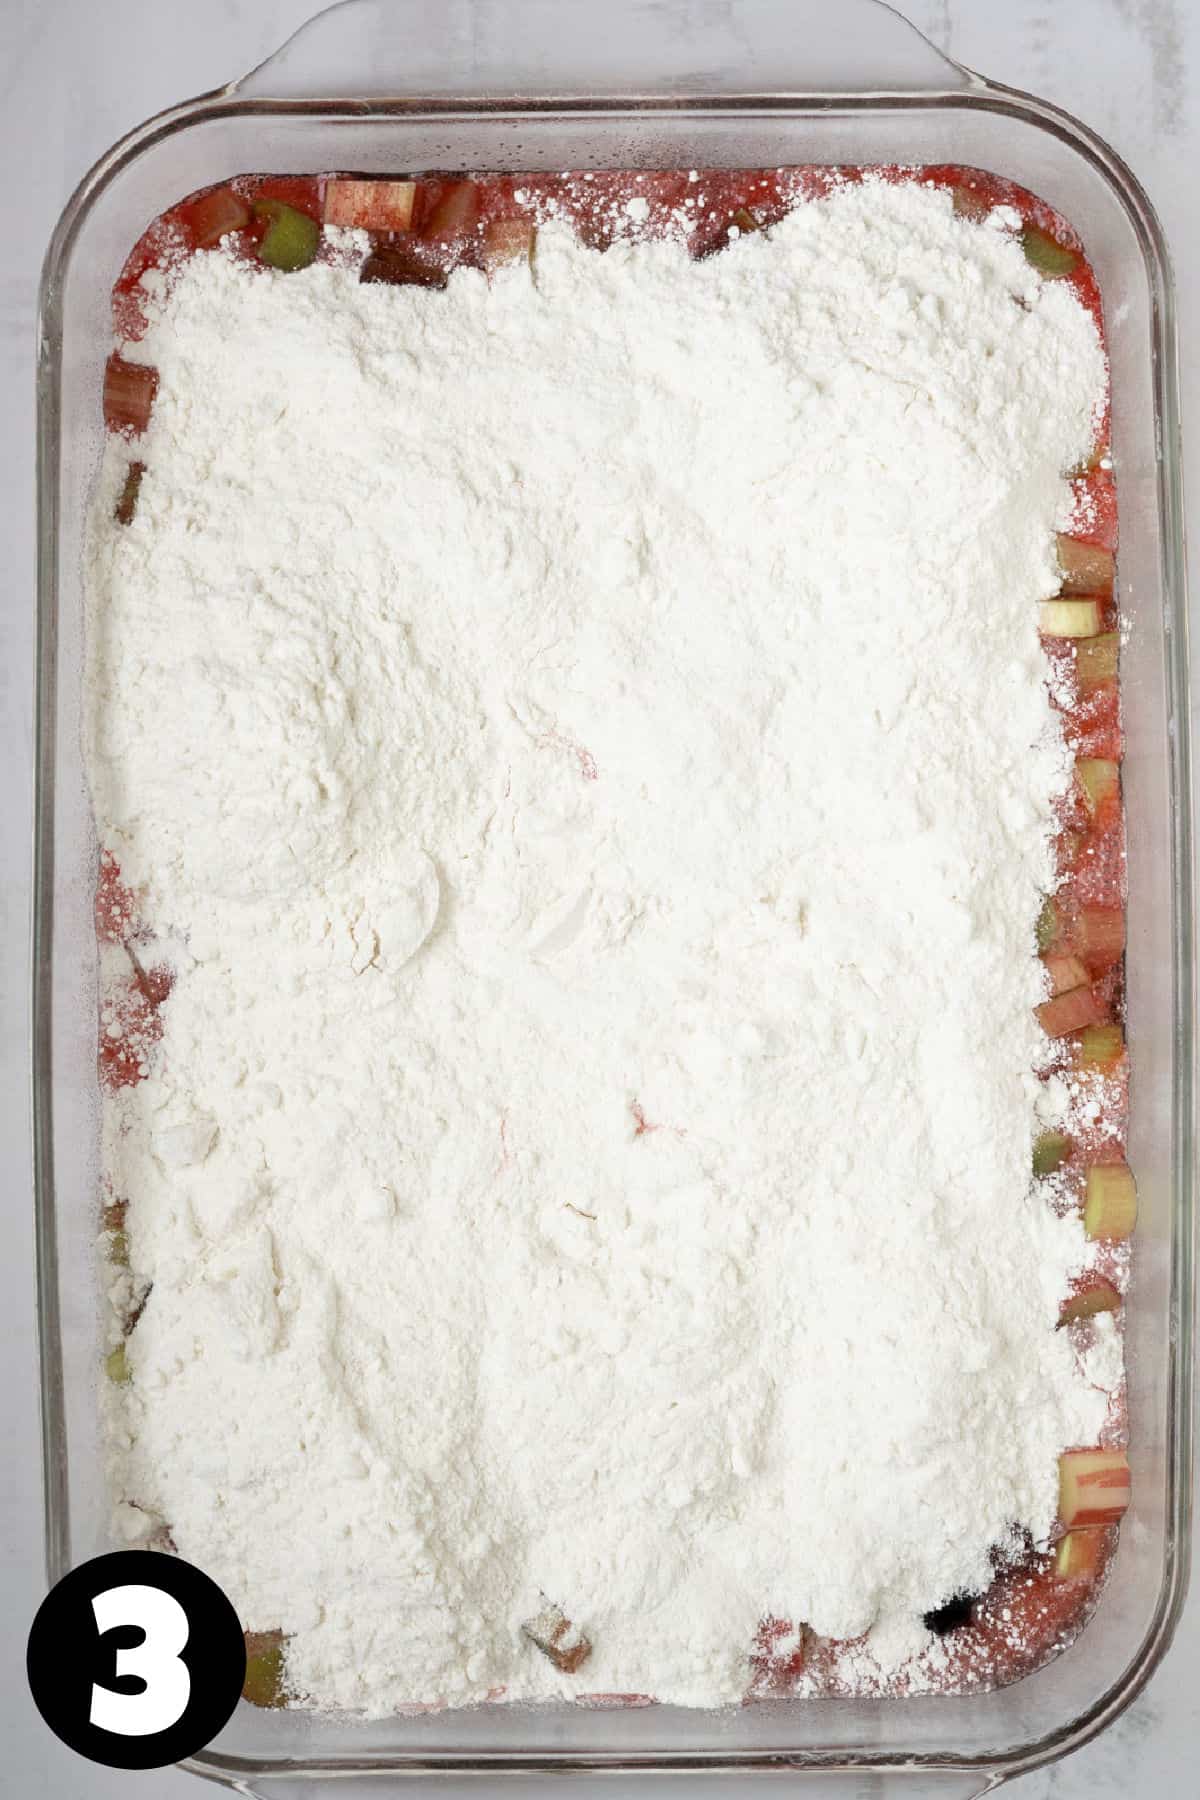 Unbaked fruit dump cake with dry boxed cake mix sprinkled over the top.